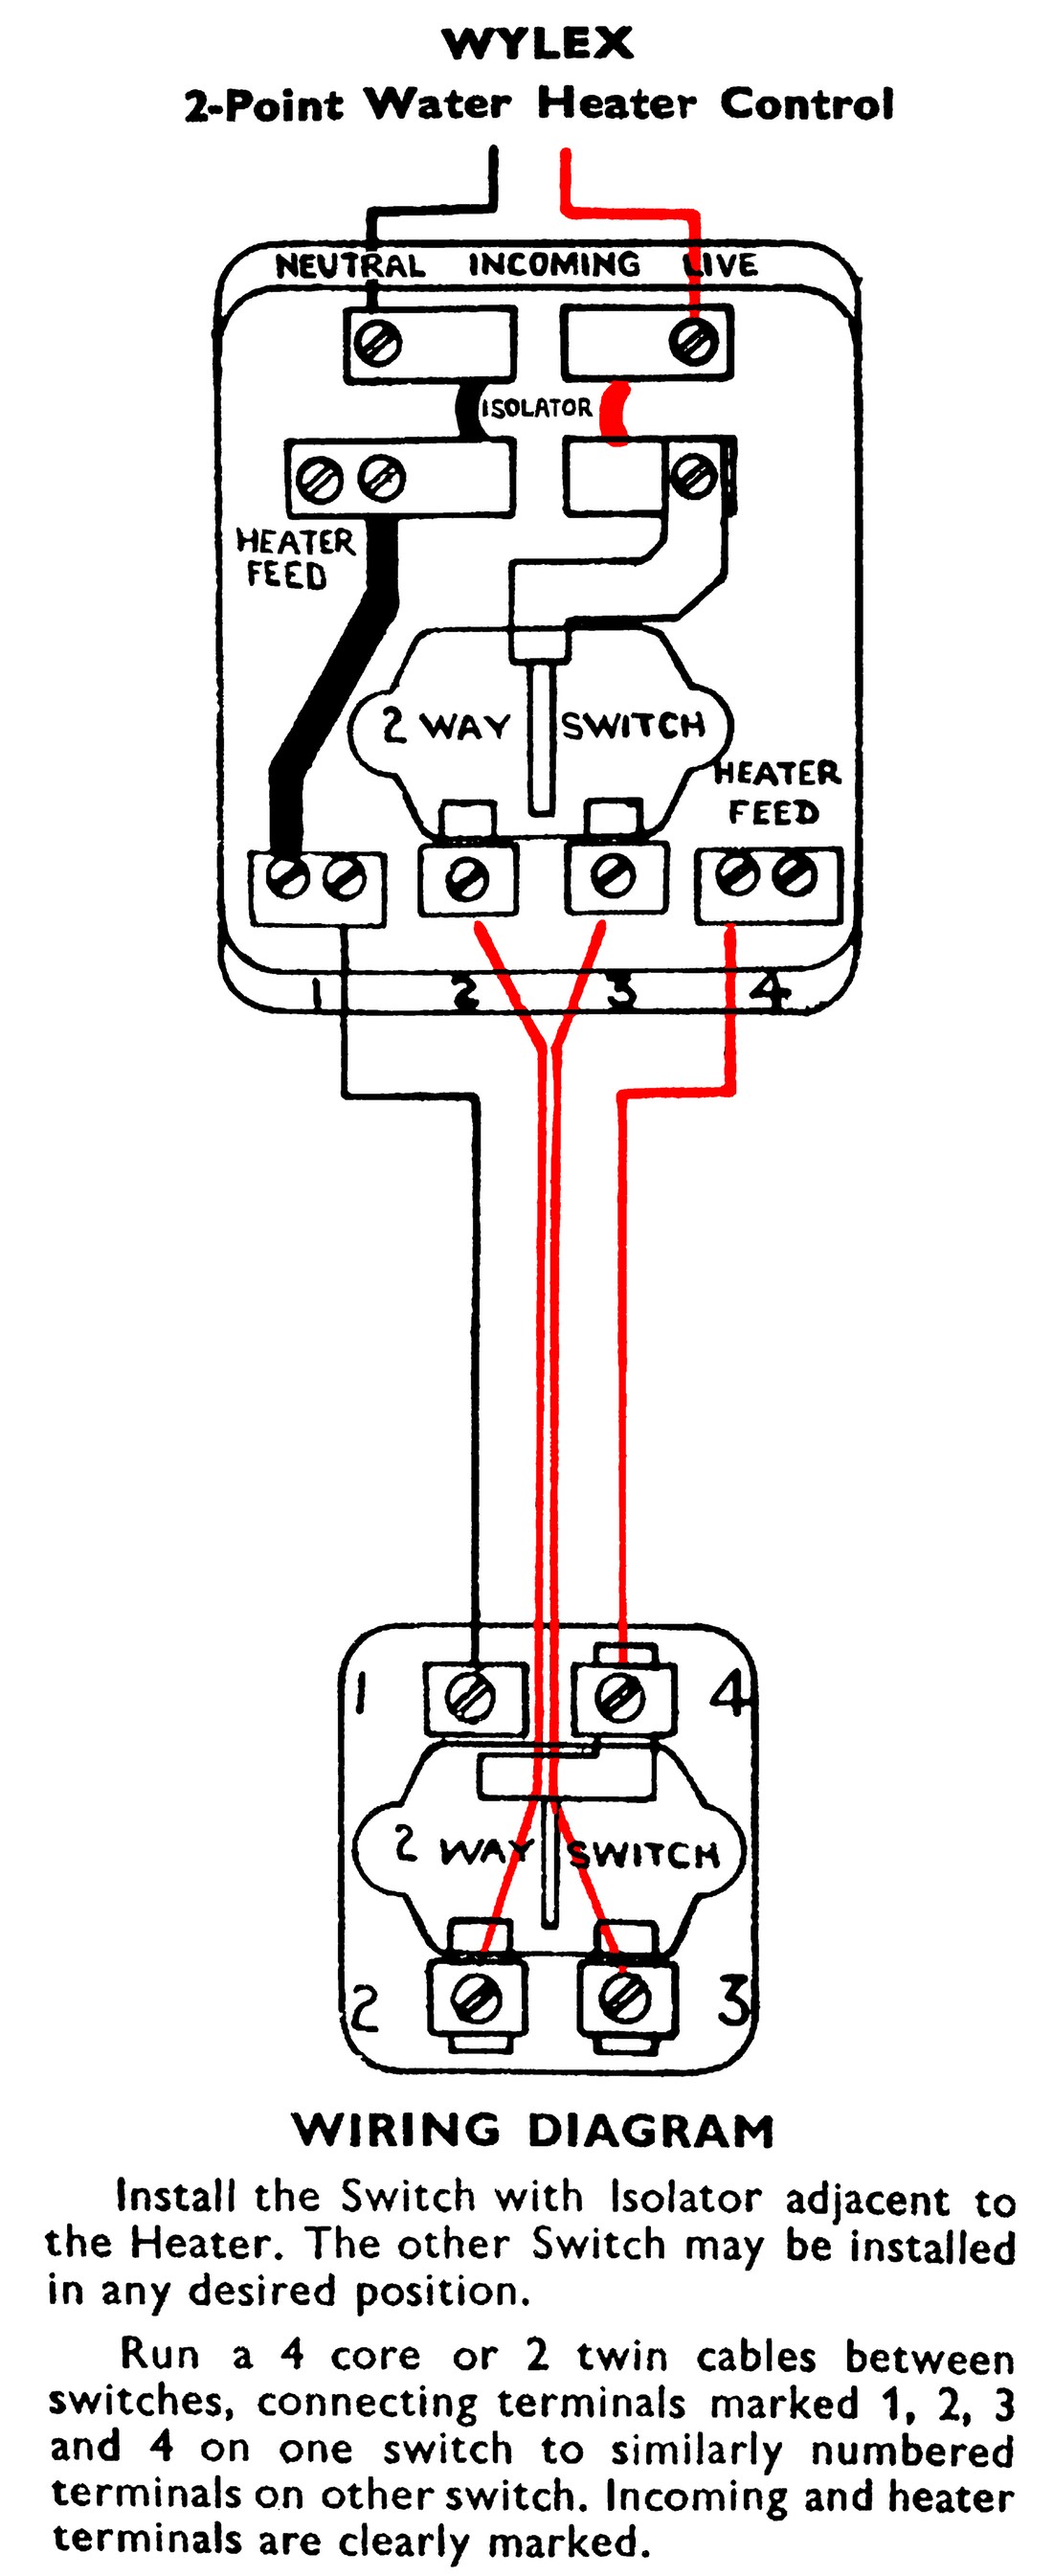 Code Electric size Wylex Rcd Wiring Diagram Car Rear View Era Besides Residential Electrical Also